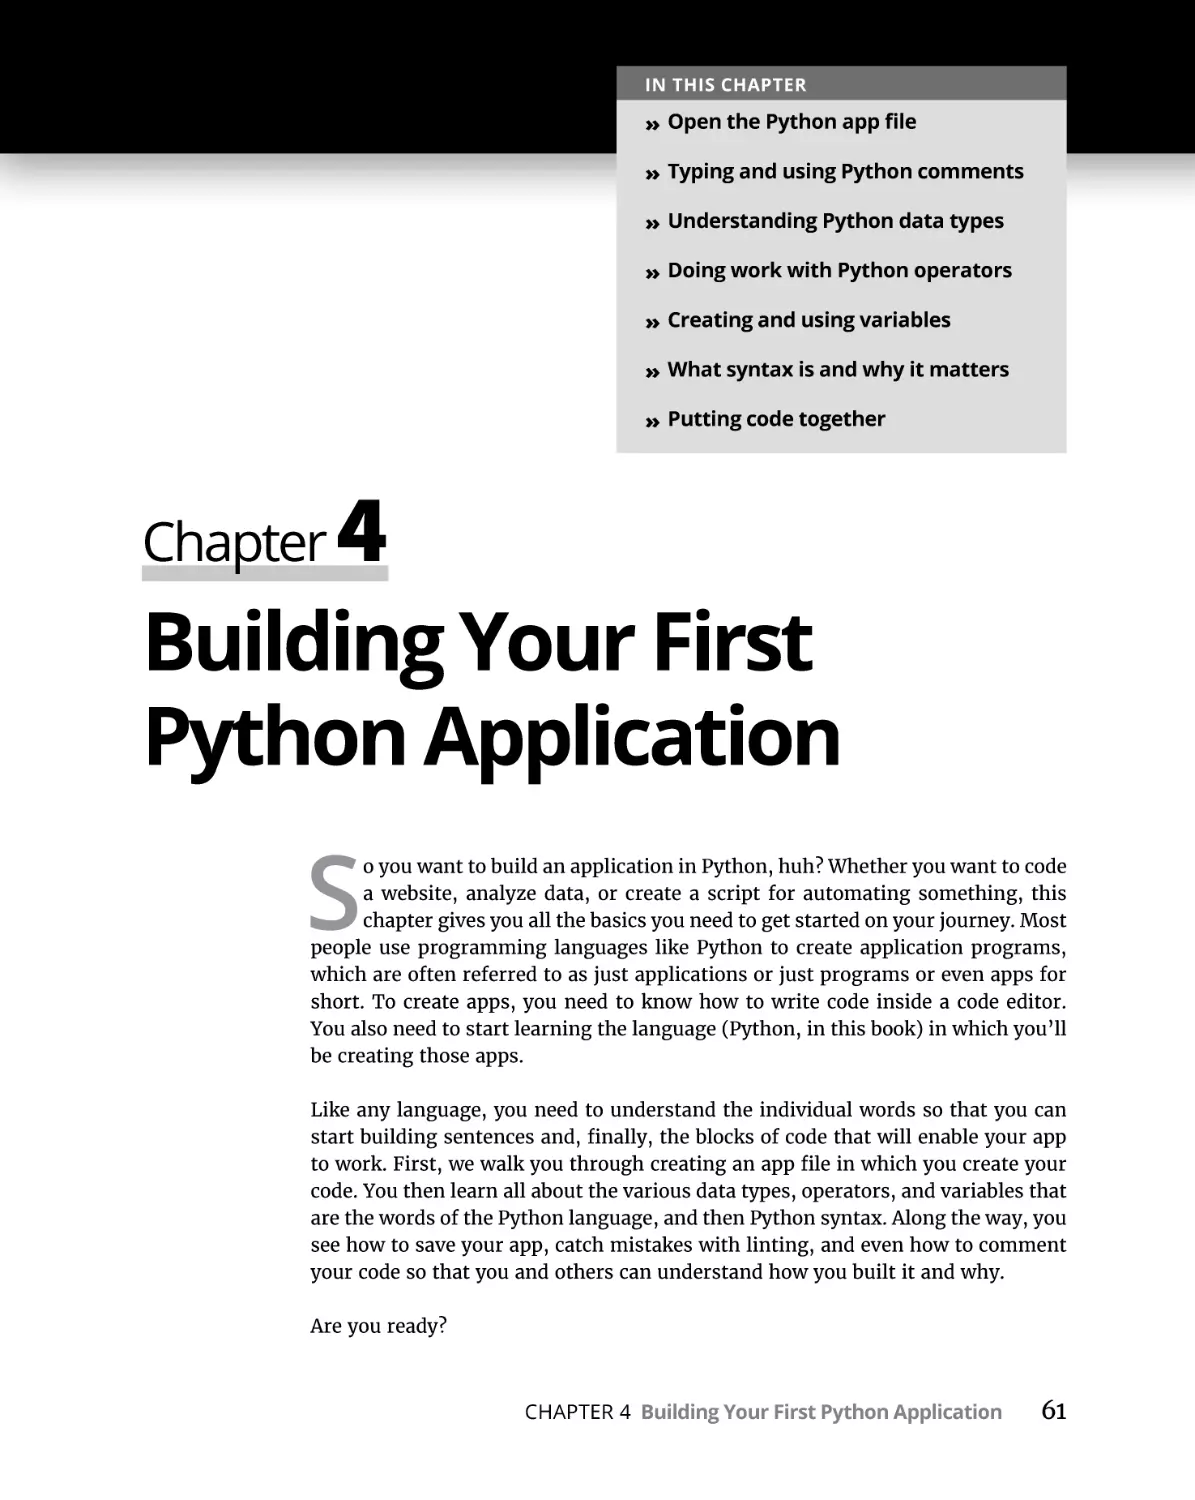 Chapter 4 Building Your First Python Application